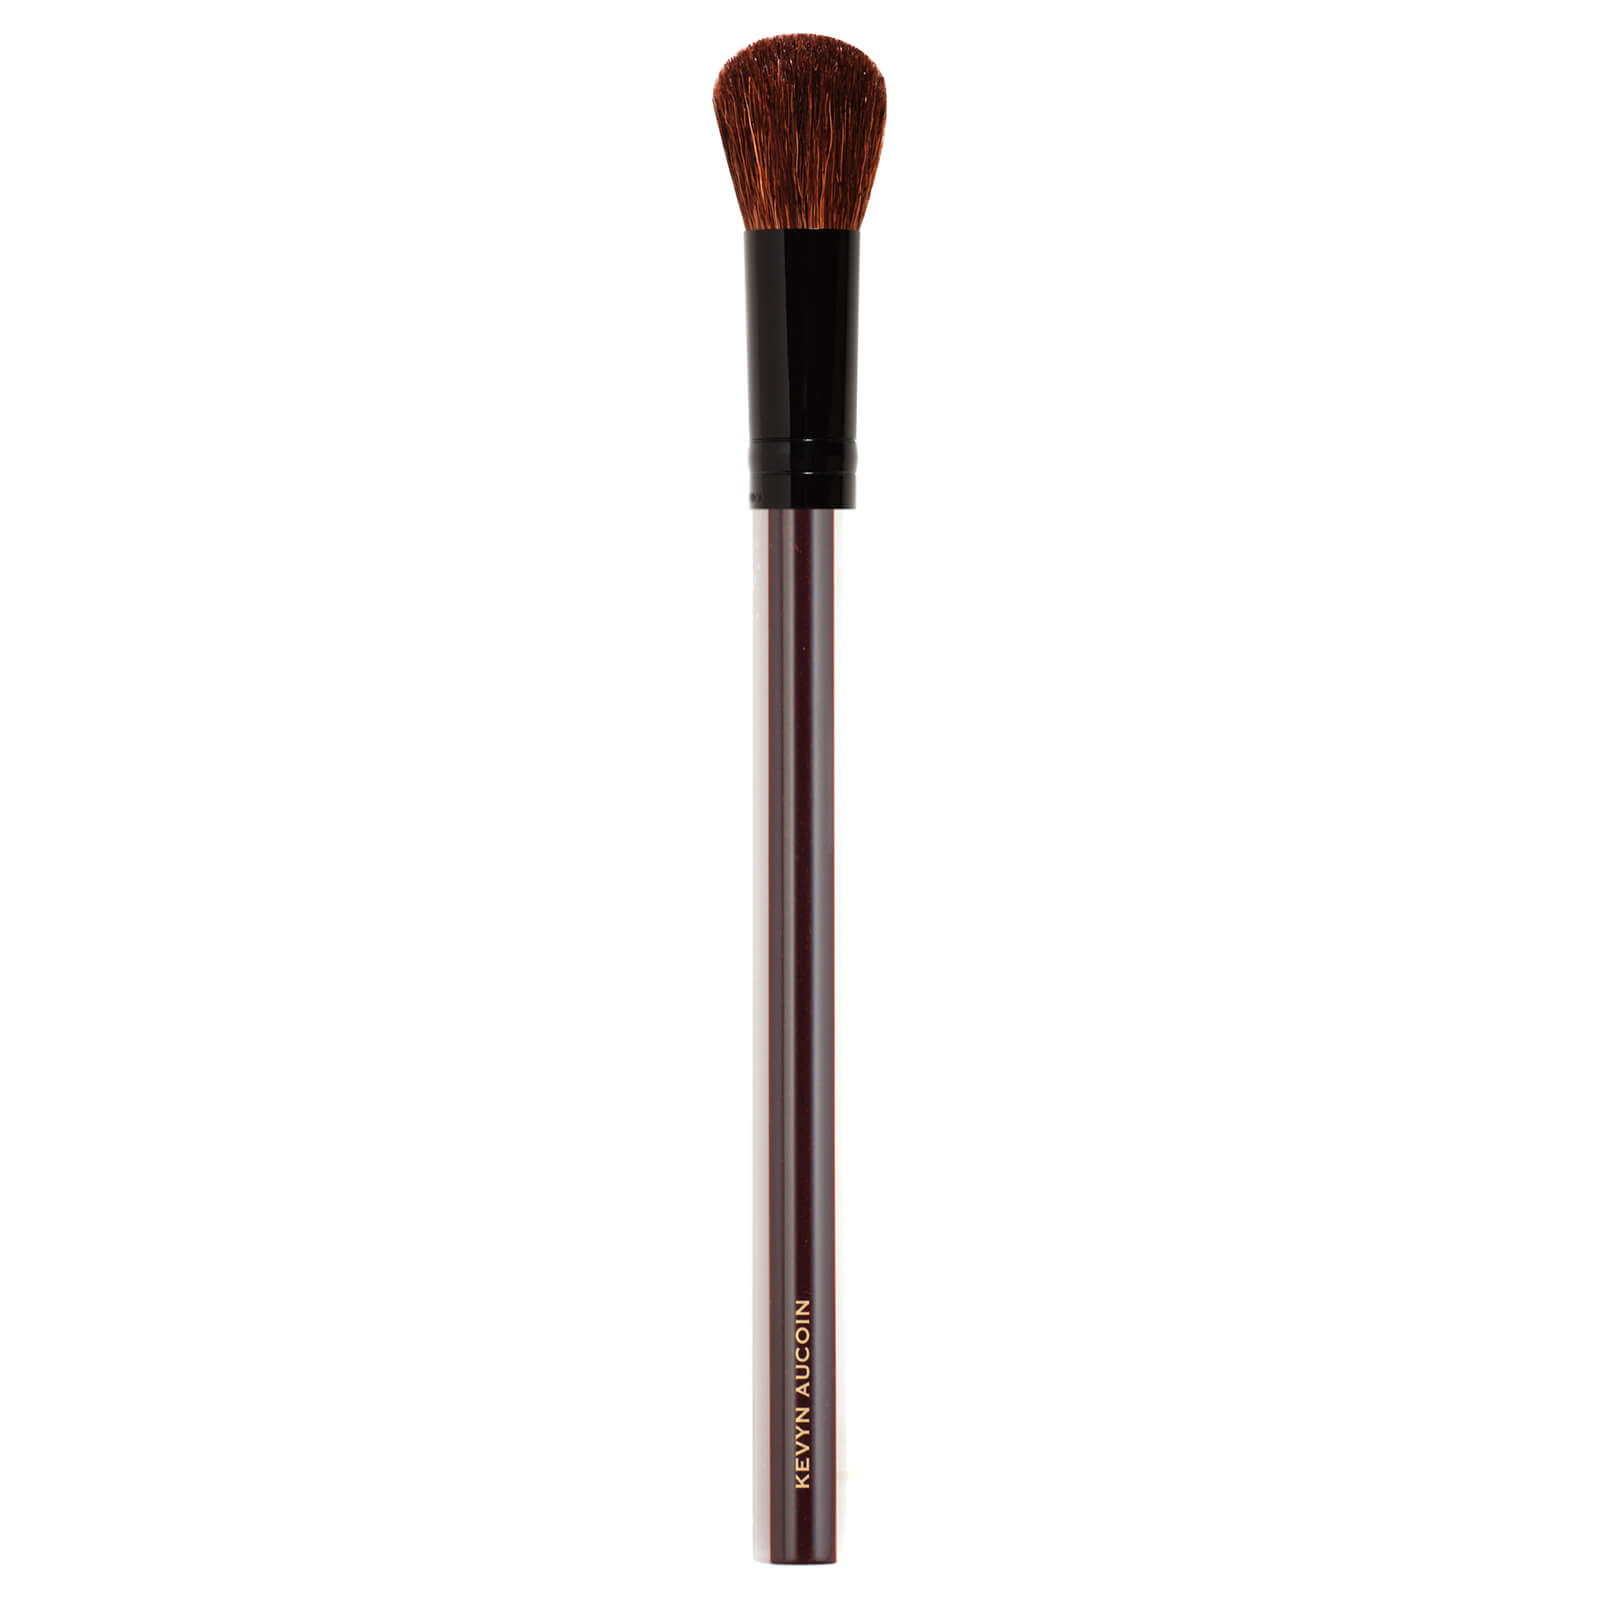 Image of Kevyn Aucoin The Contour Brush